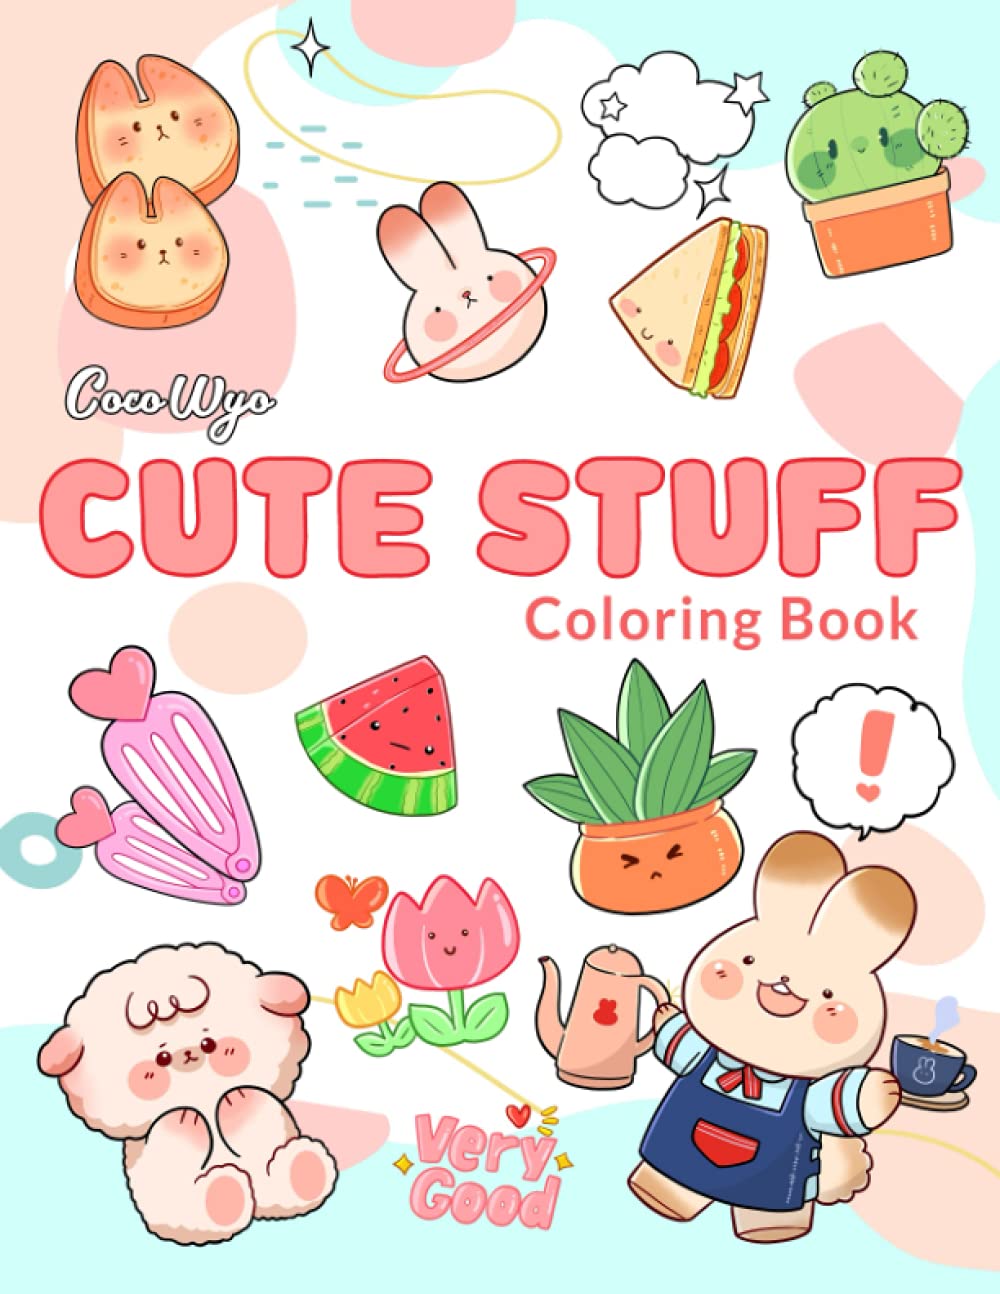 Cute stuff coloring book coloring books with adorable illustrations such as cute bunnies unicorns desserts foods and more for stress relief relaxation by coco wyo